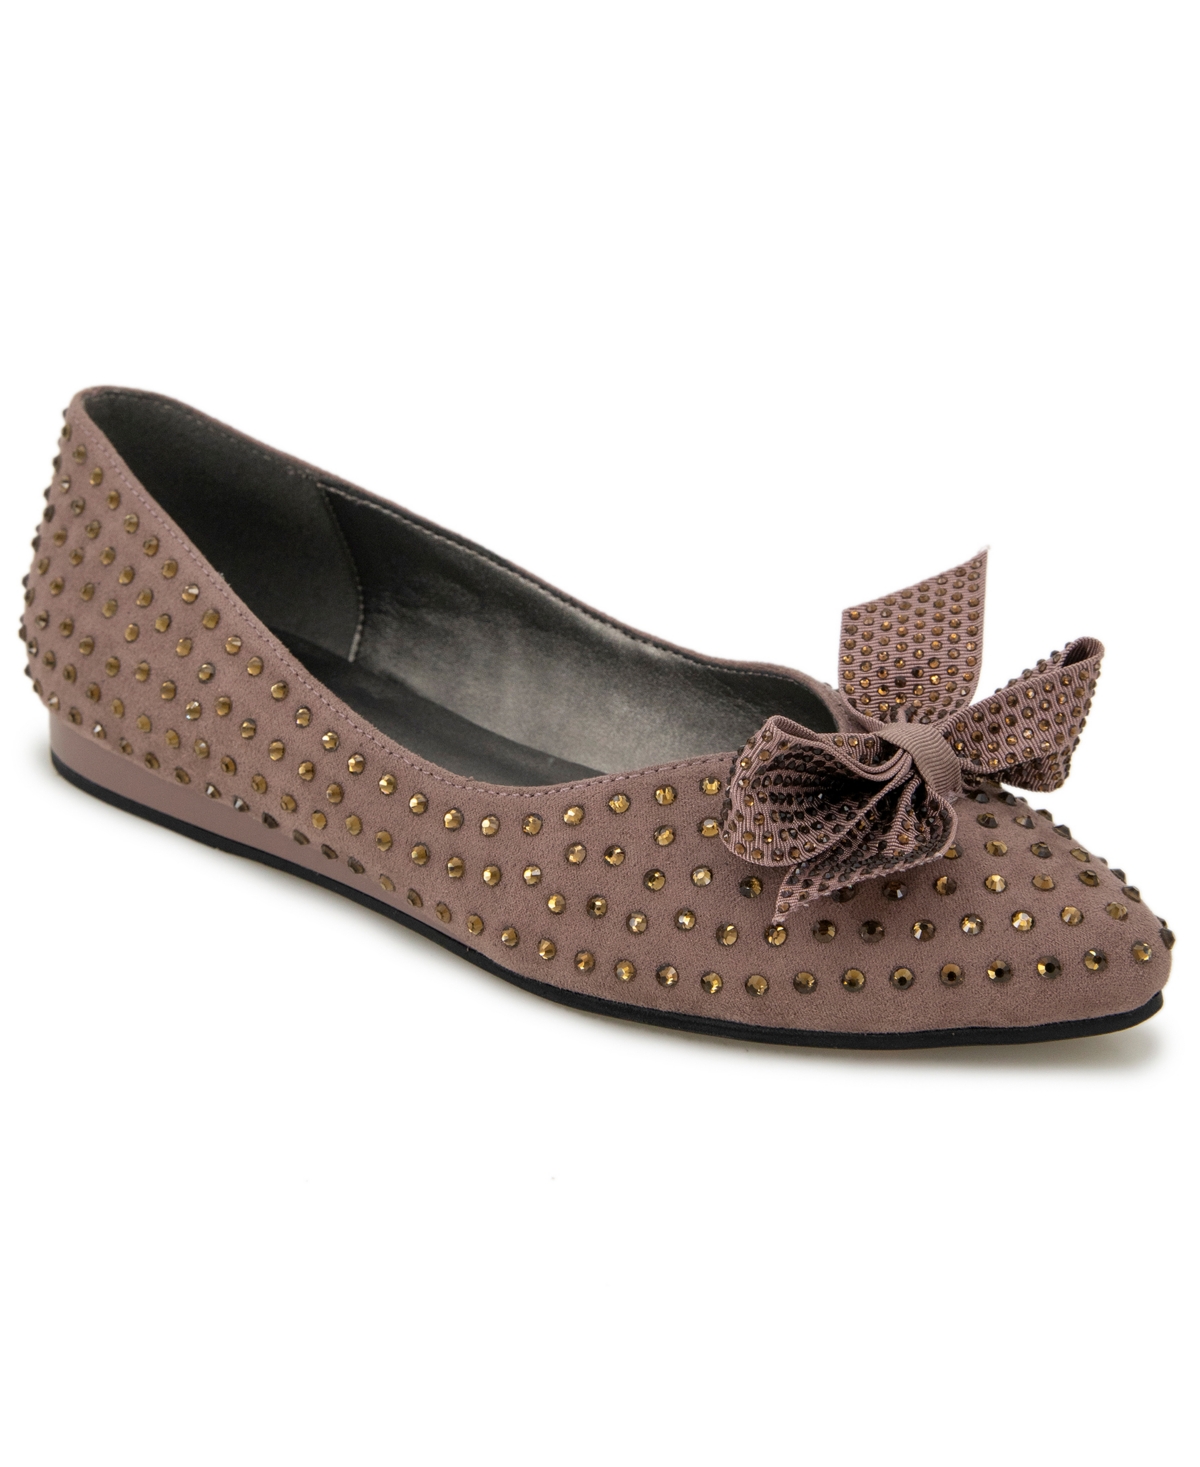 Kenneth Cole Reaction Lucie Jewel Bow Ballet Flats Women's Shoes